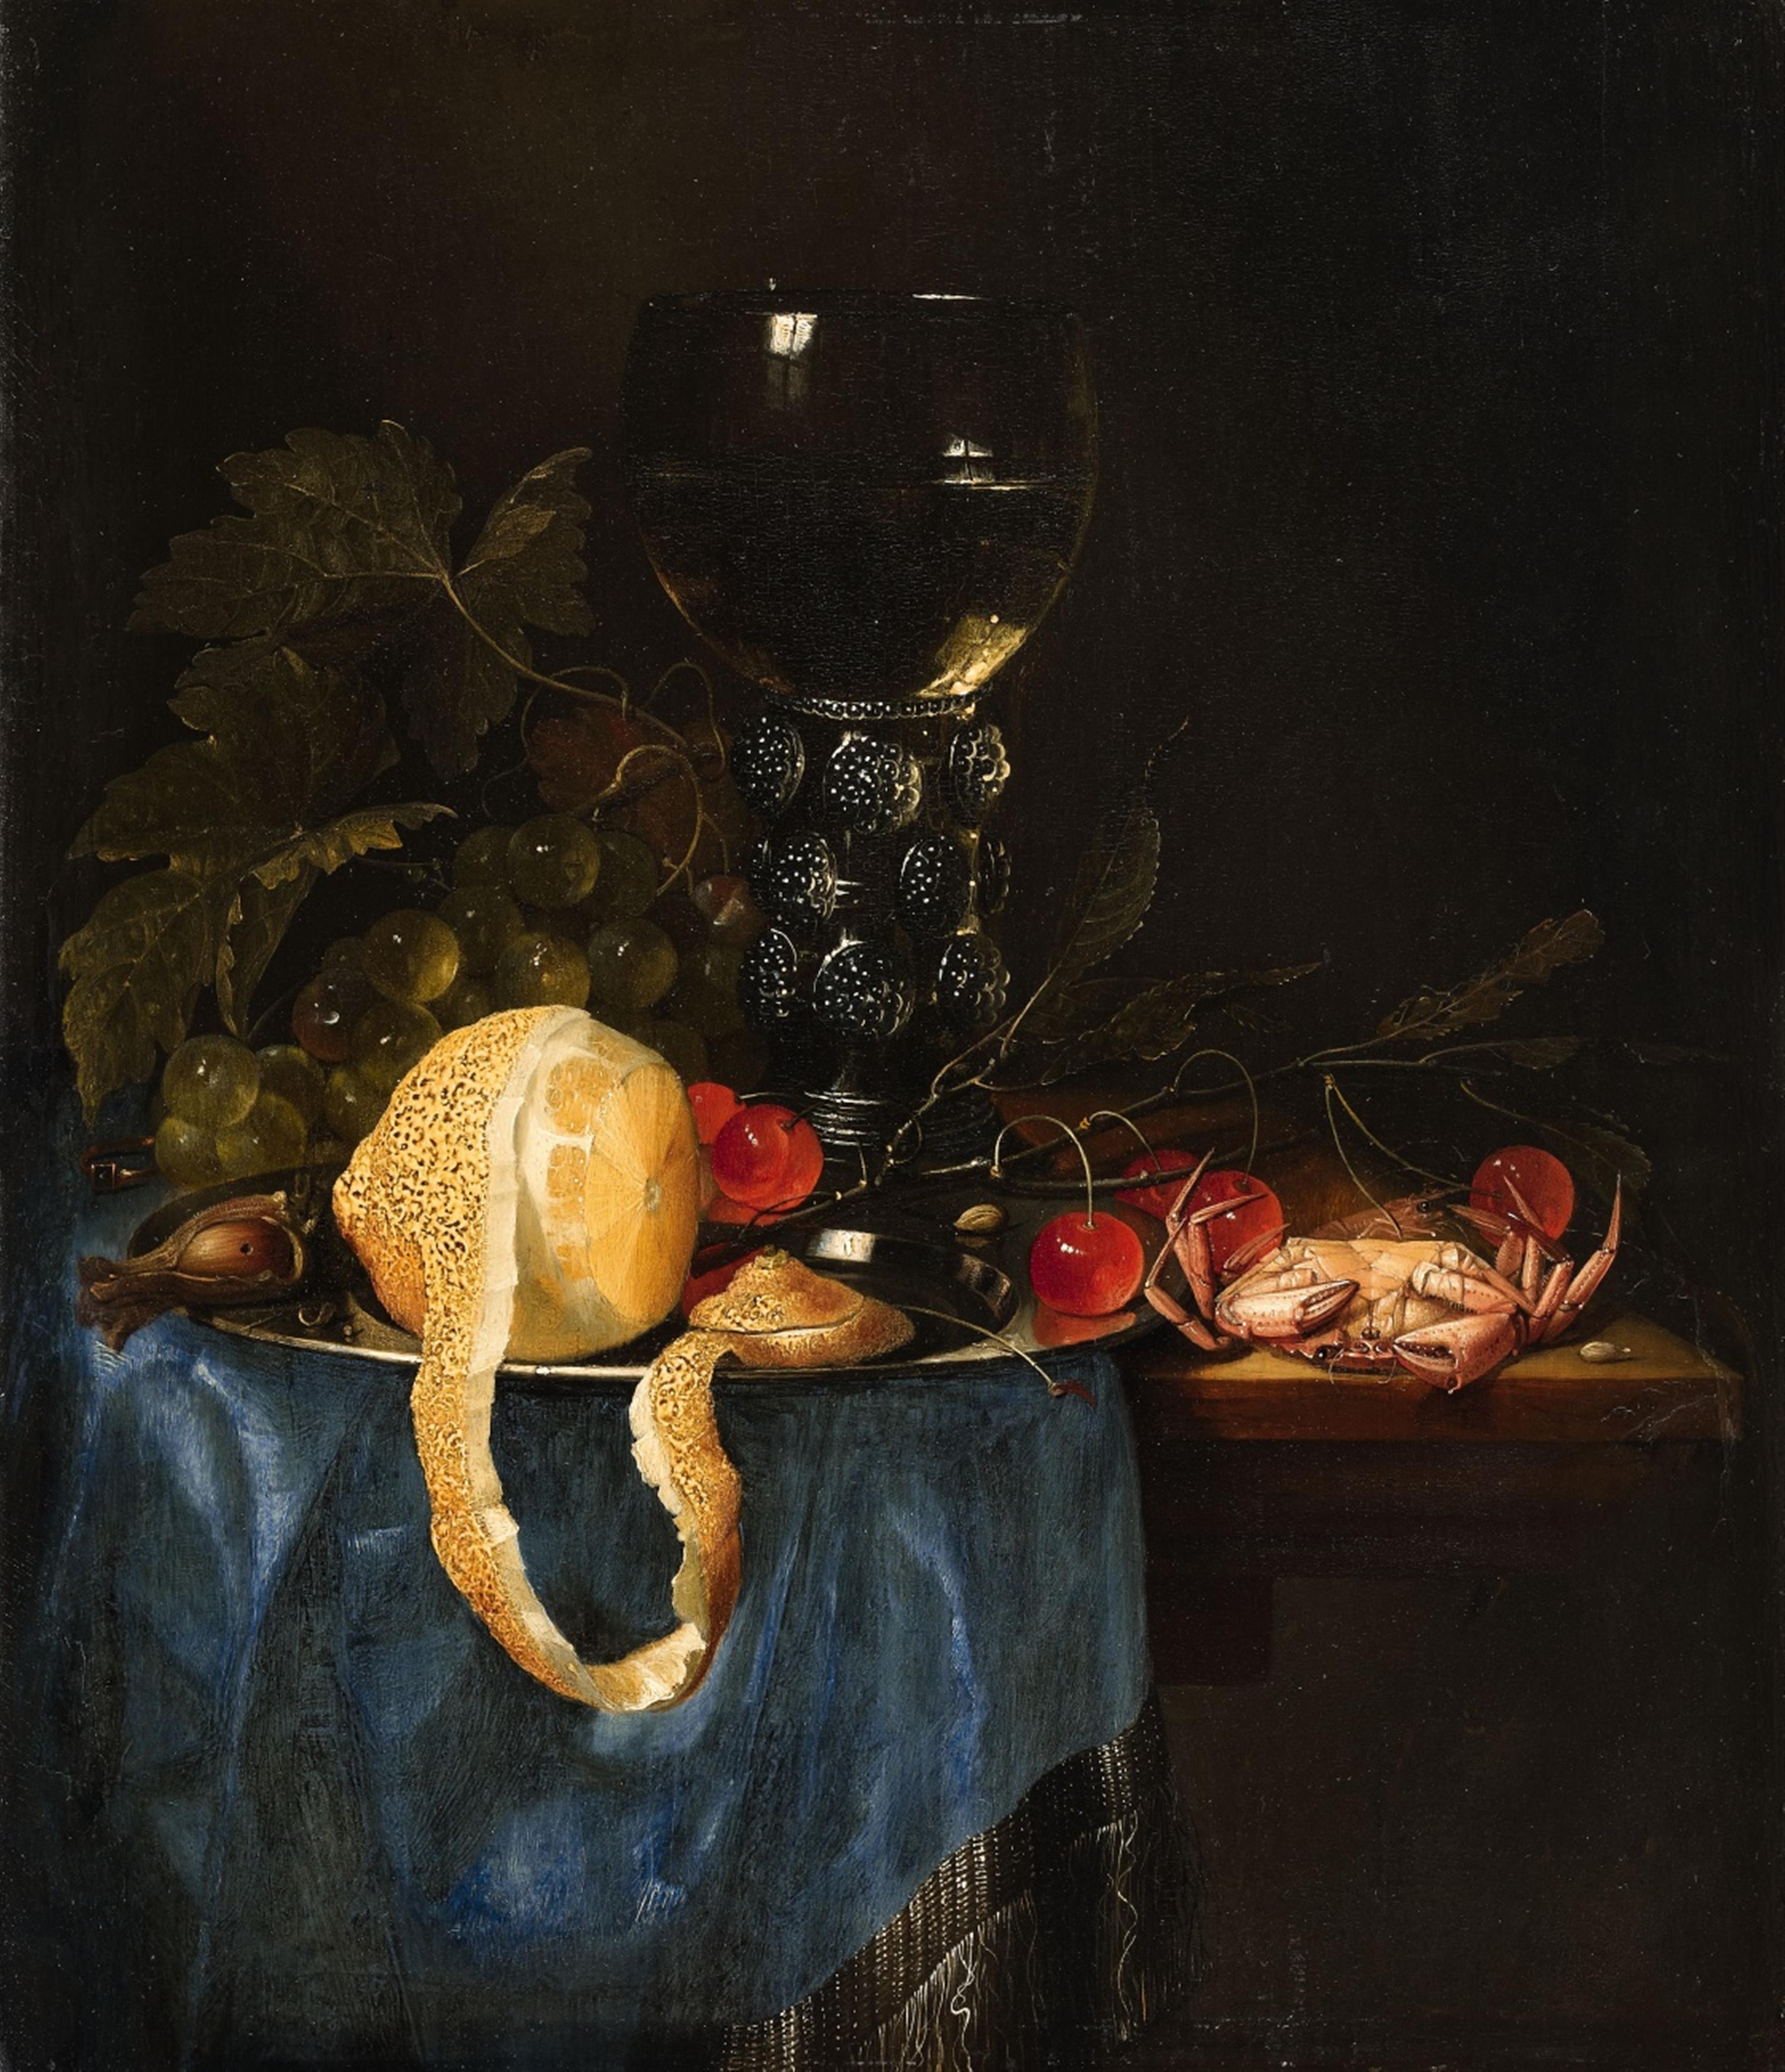 Pieter de Ring - Still Life with a Lemon, Rummer, Grapes, Cherries and Shellfish - image-1